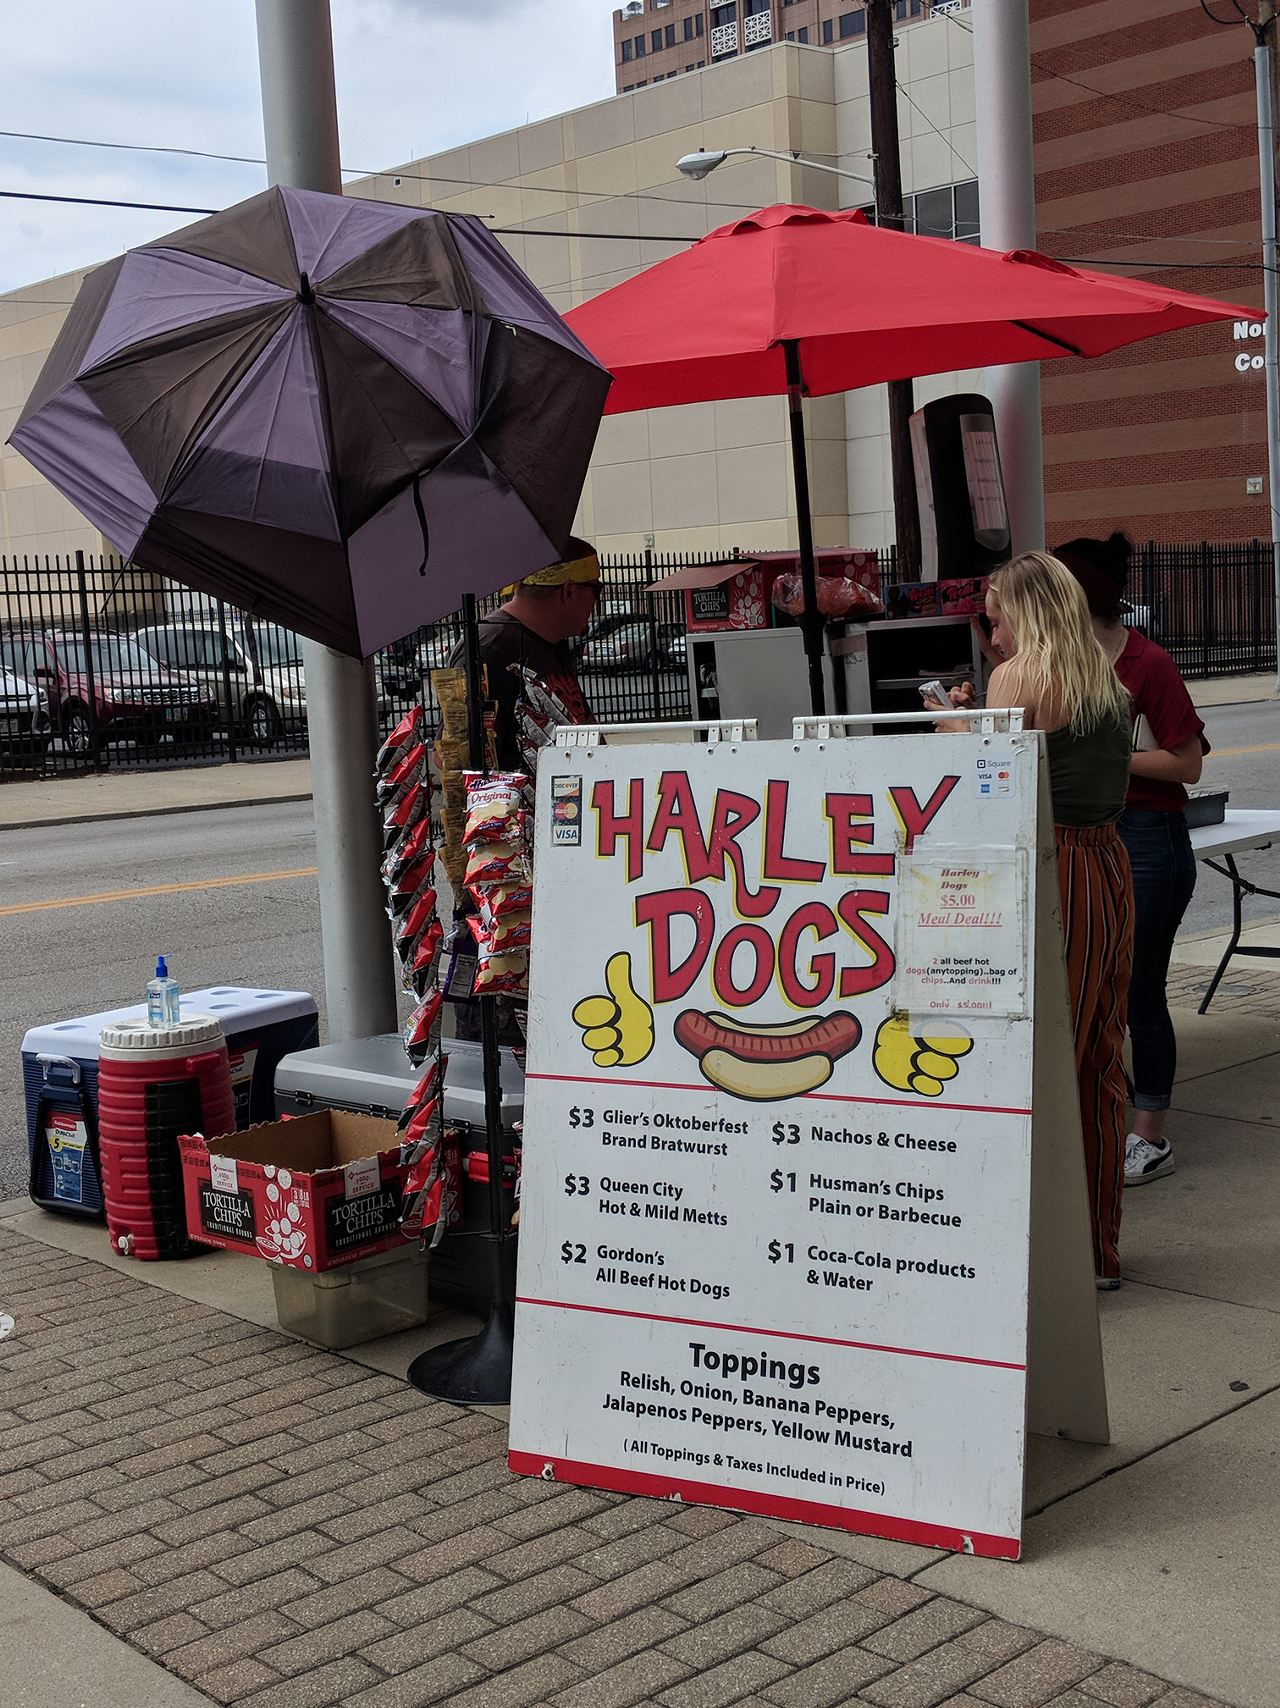 Harley Dogs (220 Madison Ave., Covington): A humble hot dog hut that holds its ground, Harley Dogs has been peddling dogs for five years and has built up quite the fan base.